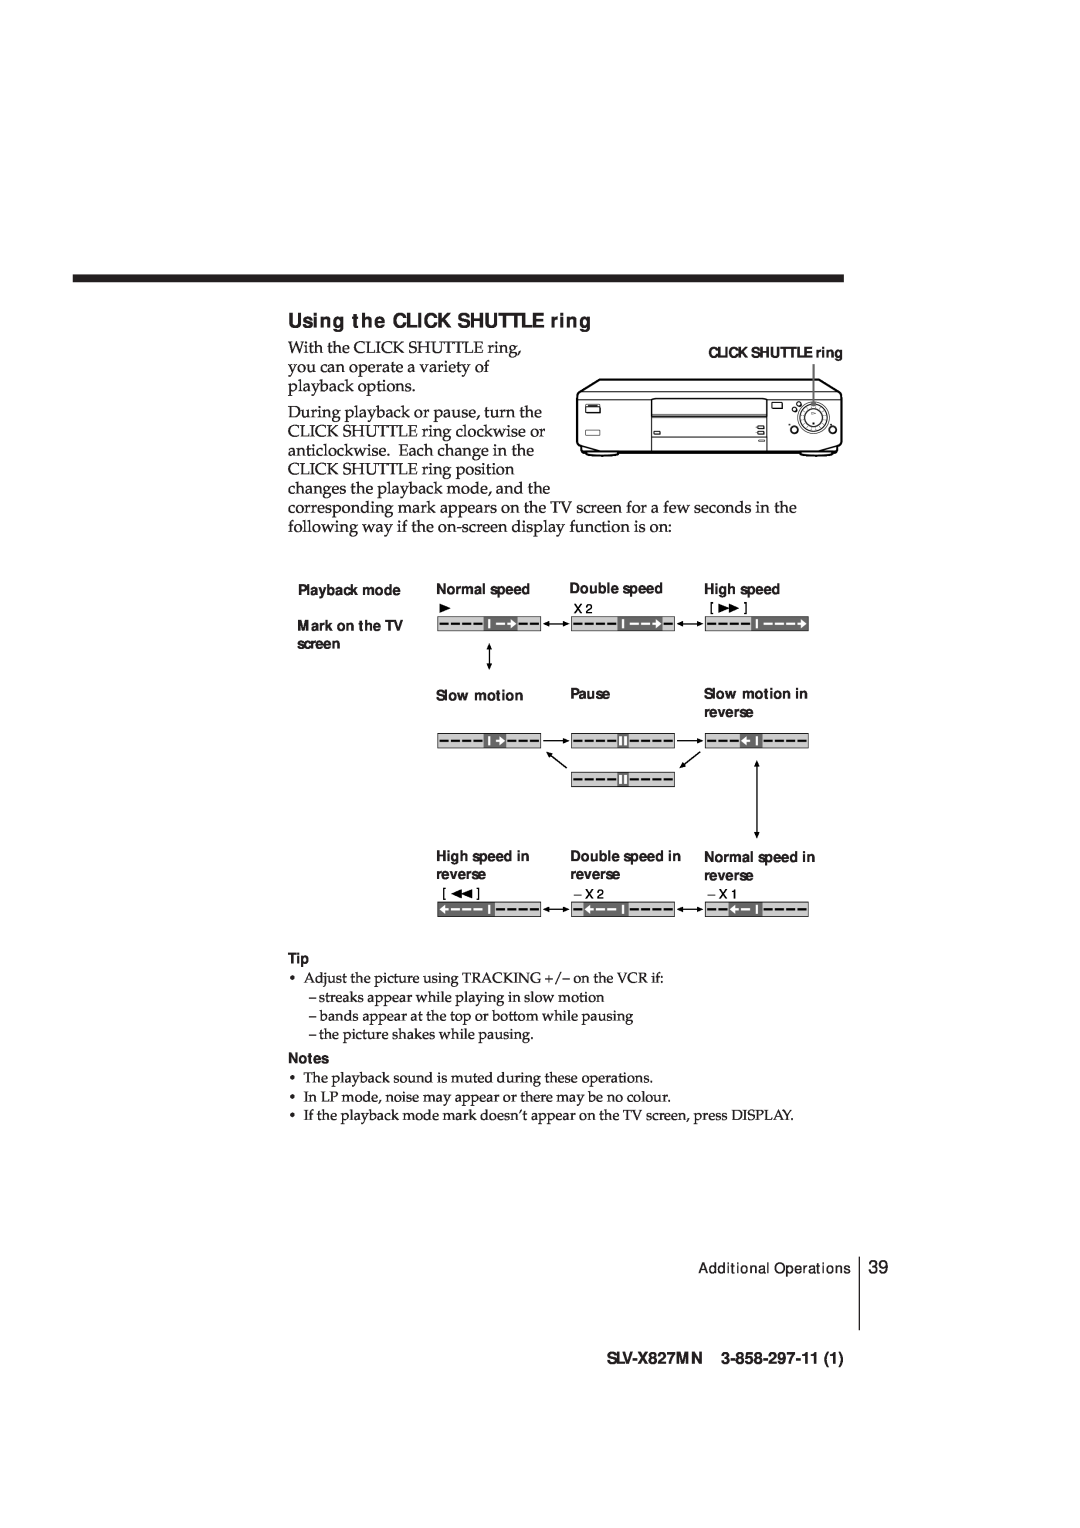 Sony manual Using the CLICK SHUTTLE ring, SLV-X827MN 3-858-297-11 